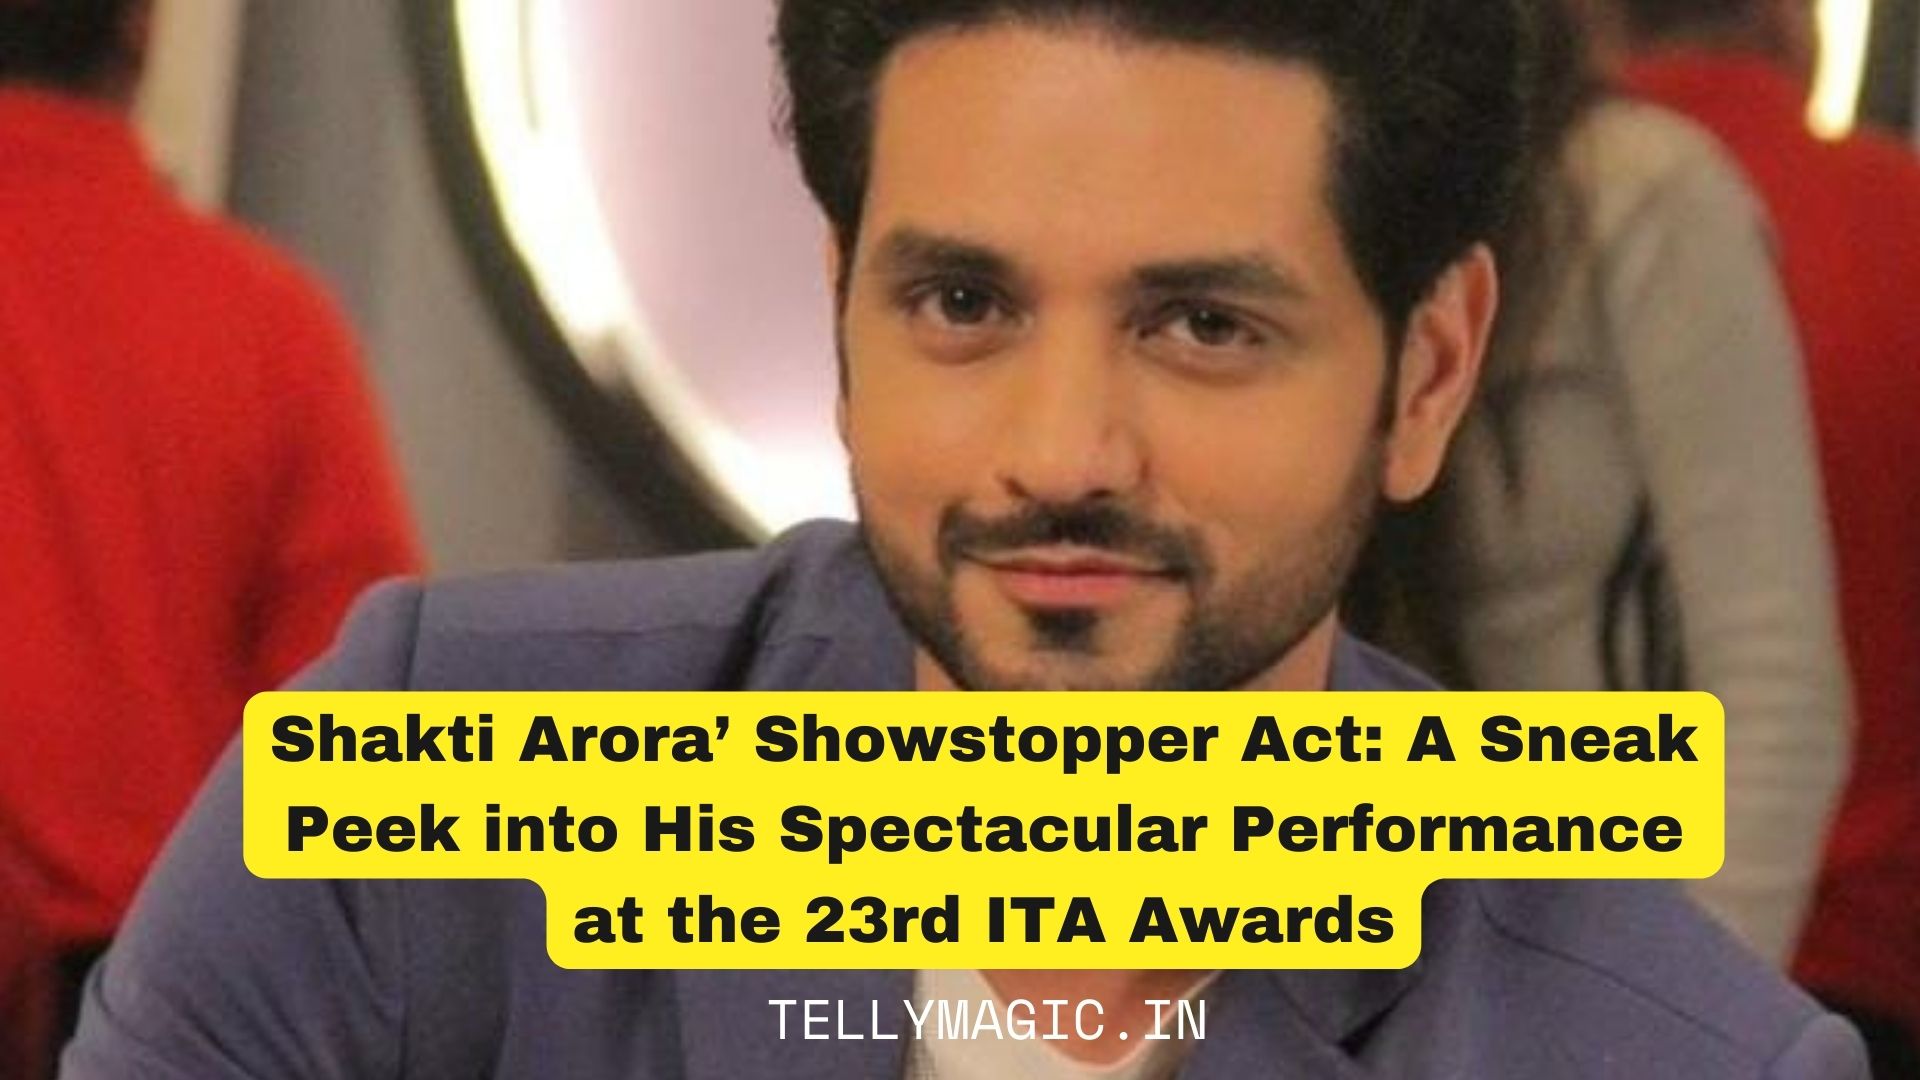 Shakti Arora Showstopper Act: A Sneak Peek into His Spectacular Performance at the 23rd ITA Awards